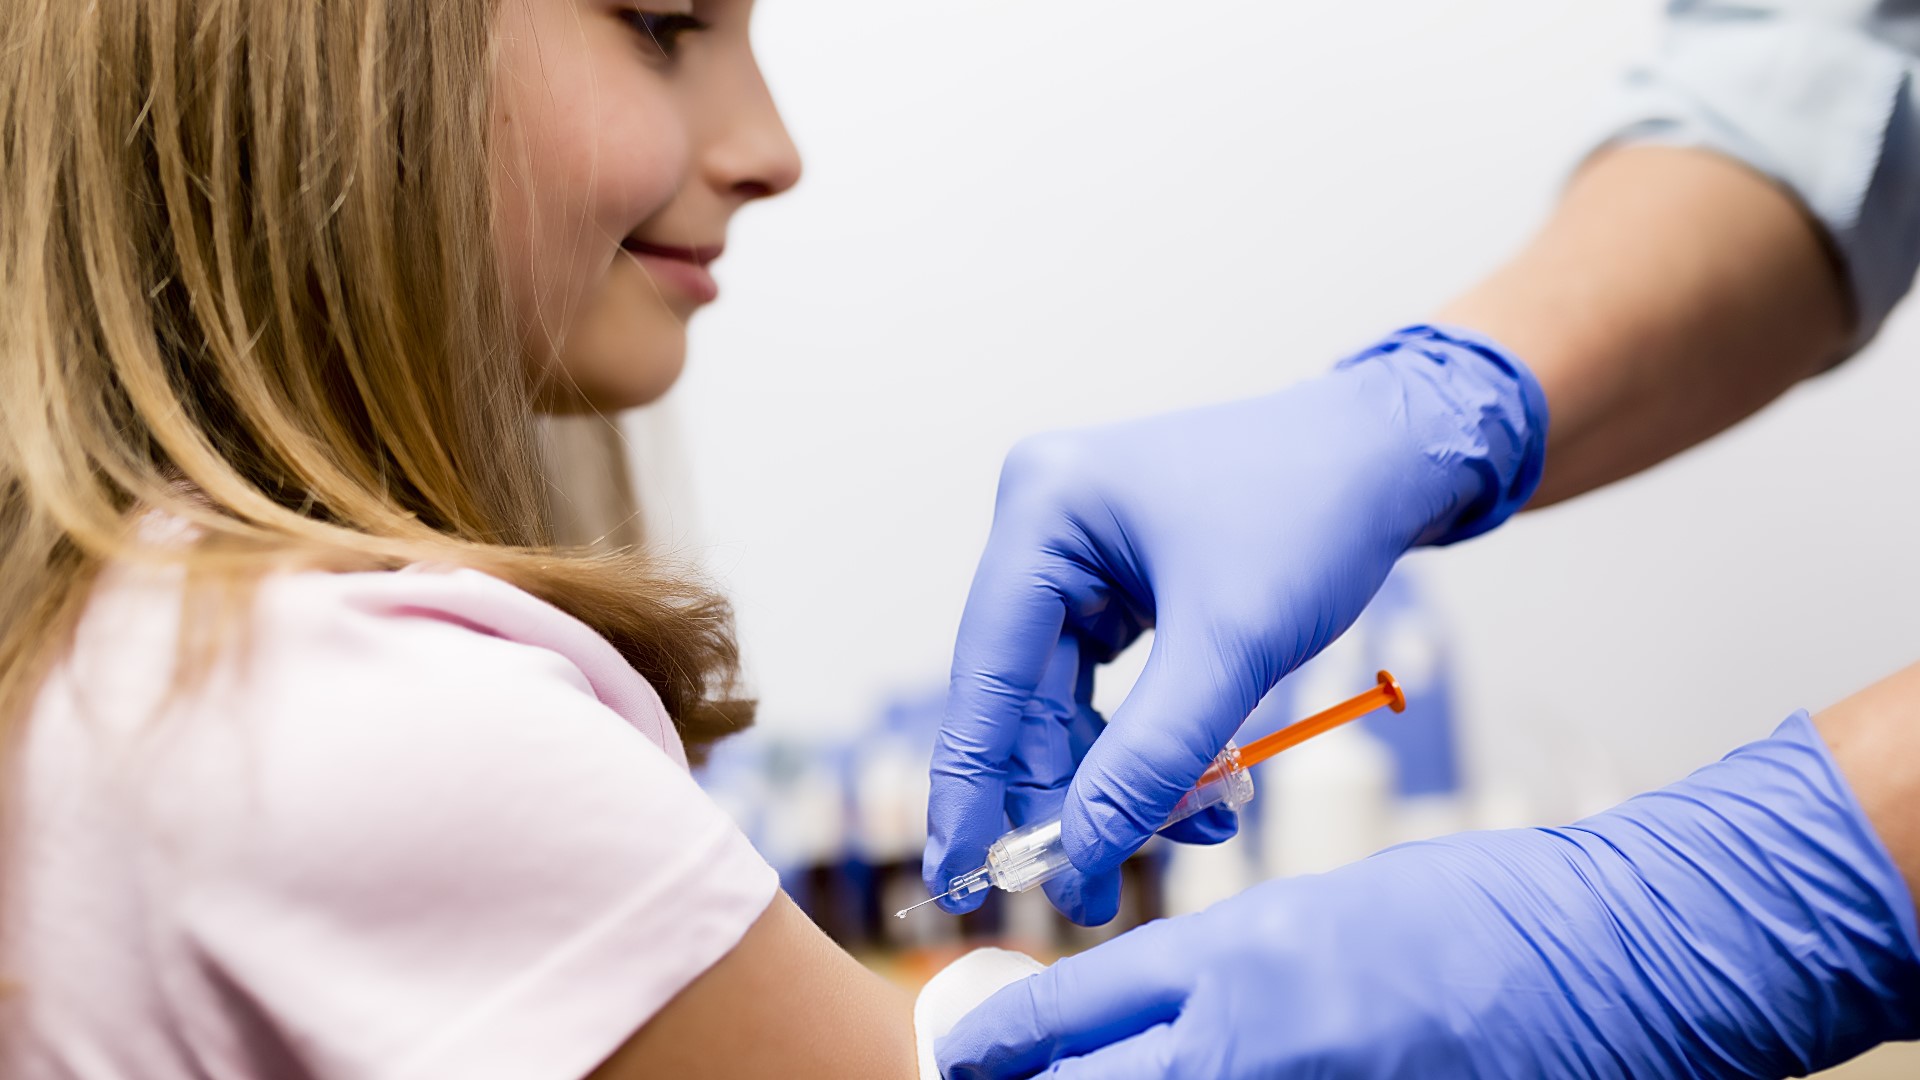 Thousands of elementary kids have gotten the COVID-19 vaccine, but some parents are concerned about schools vaccinated kids without parental consent.